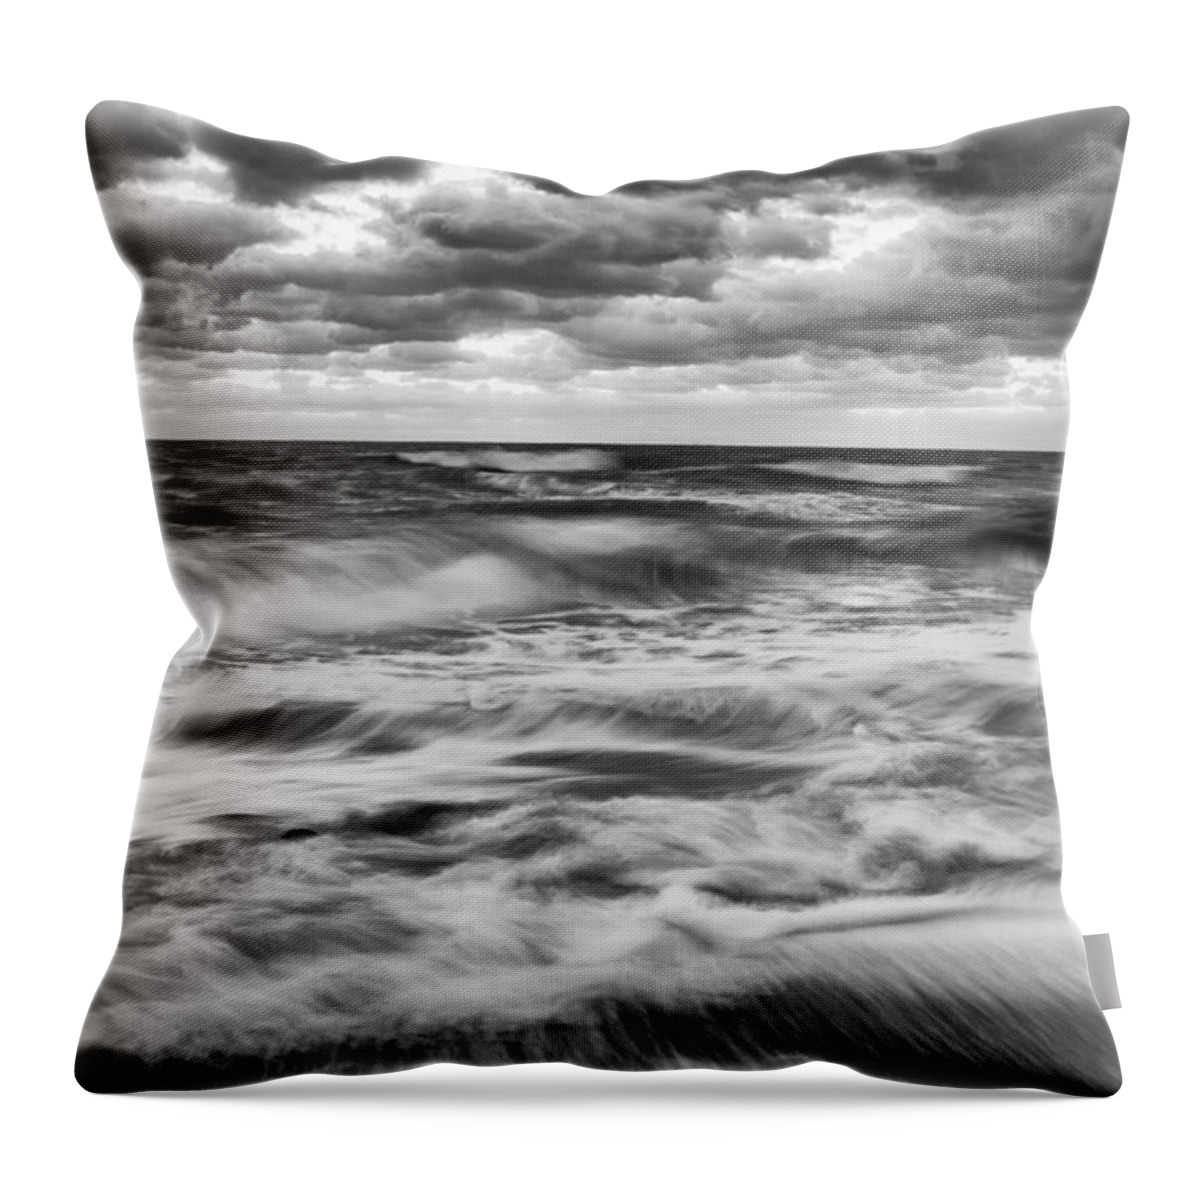 Acrylic Throw Pillow featuring the photograph Ocean in Flux by Jon Glaser